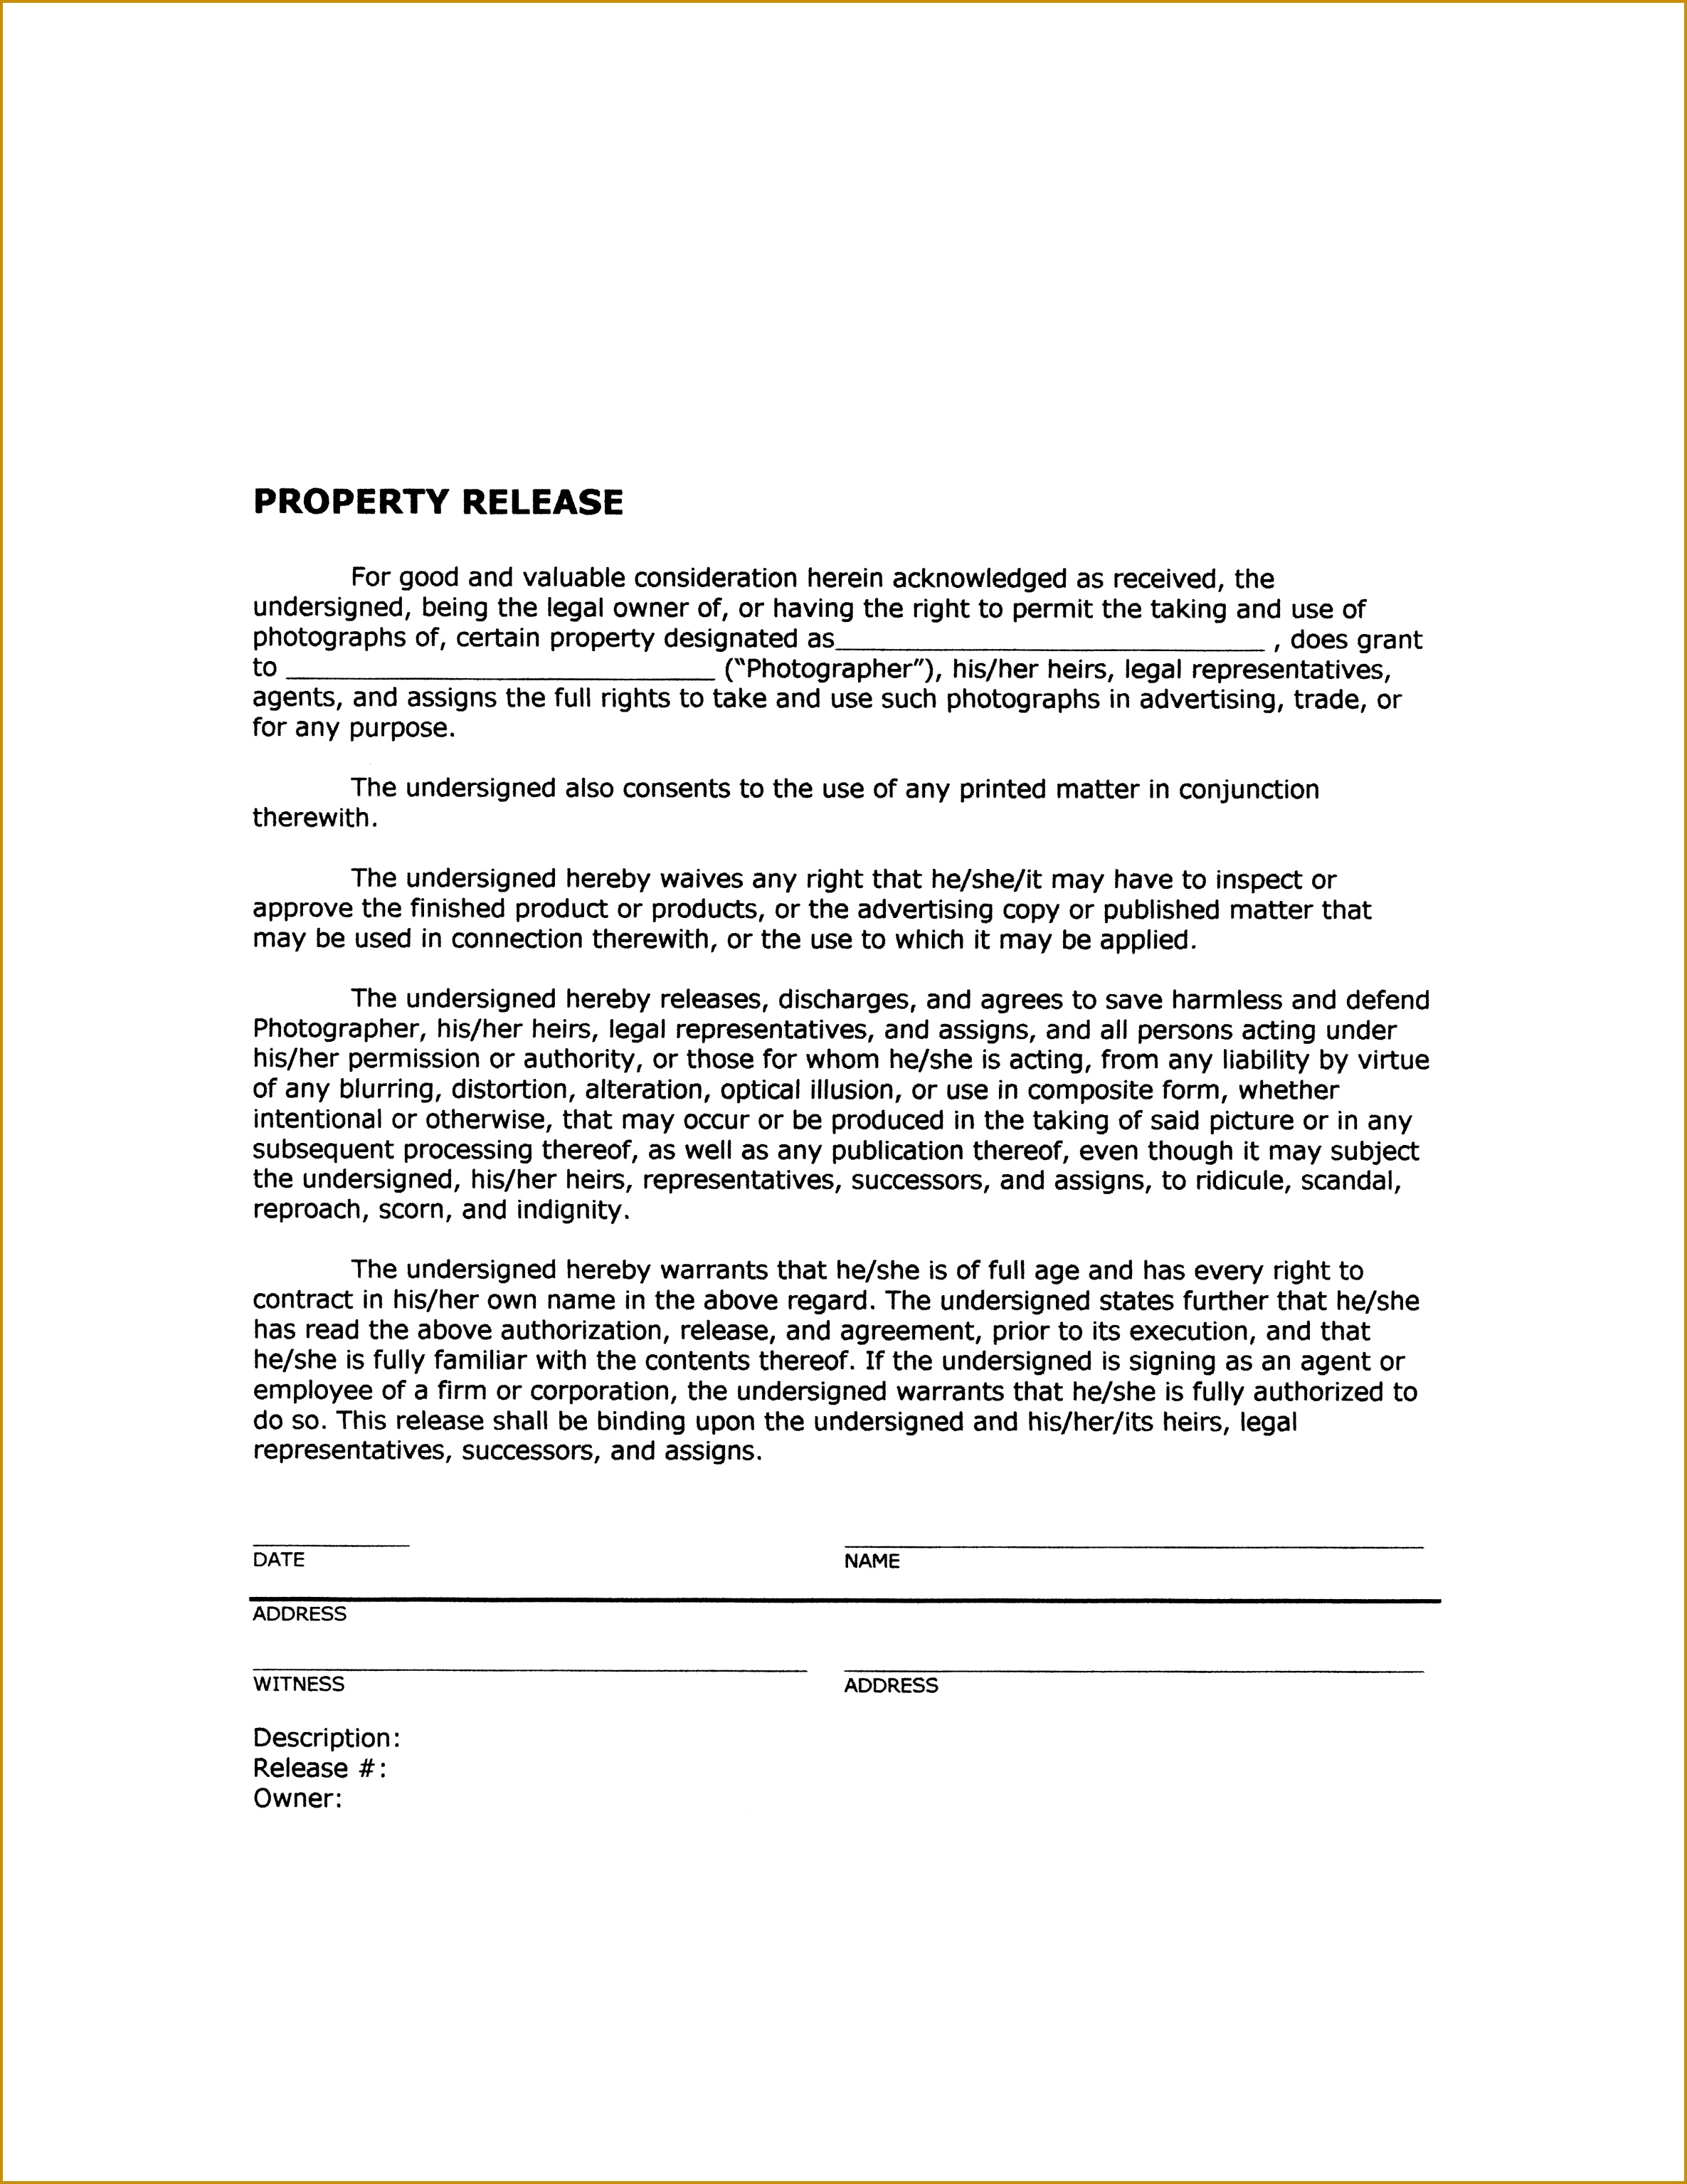 liability waiver sample example of liability waiver technology property release form property release form property release 30692371